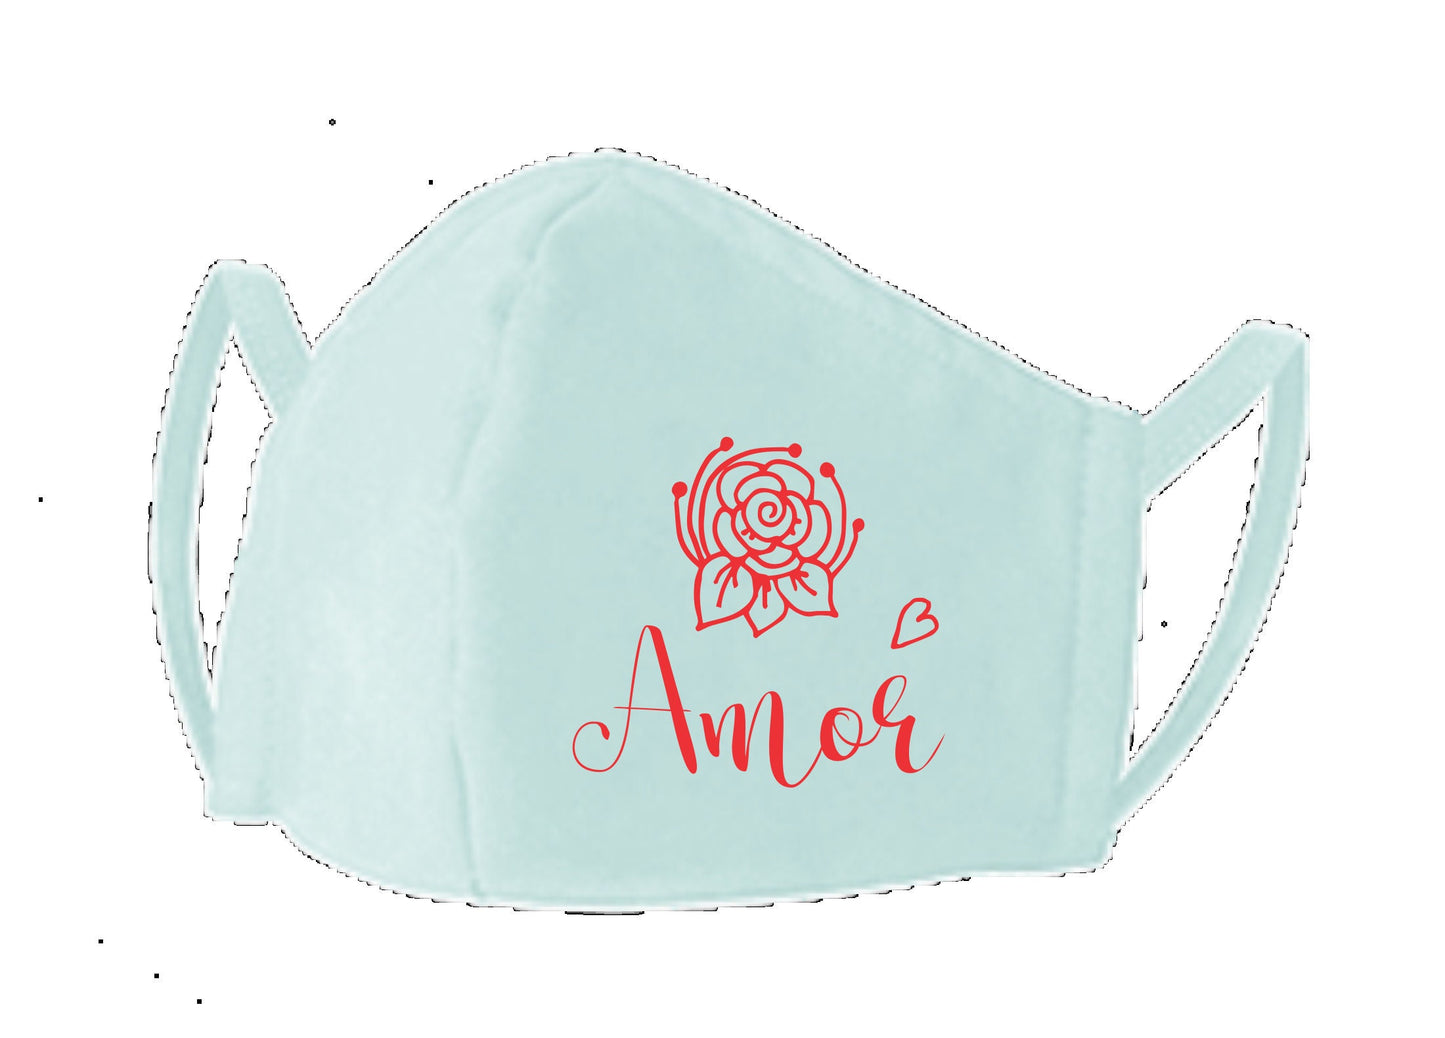 Face Mask, Amor. Gift for Her, Lover, Love, Stay Safe, Reusable, Washable, Cute Saying, Ice Blue, Comfortable